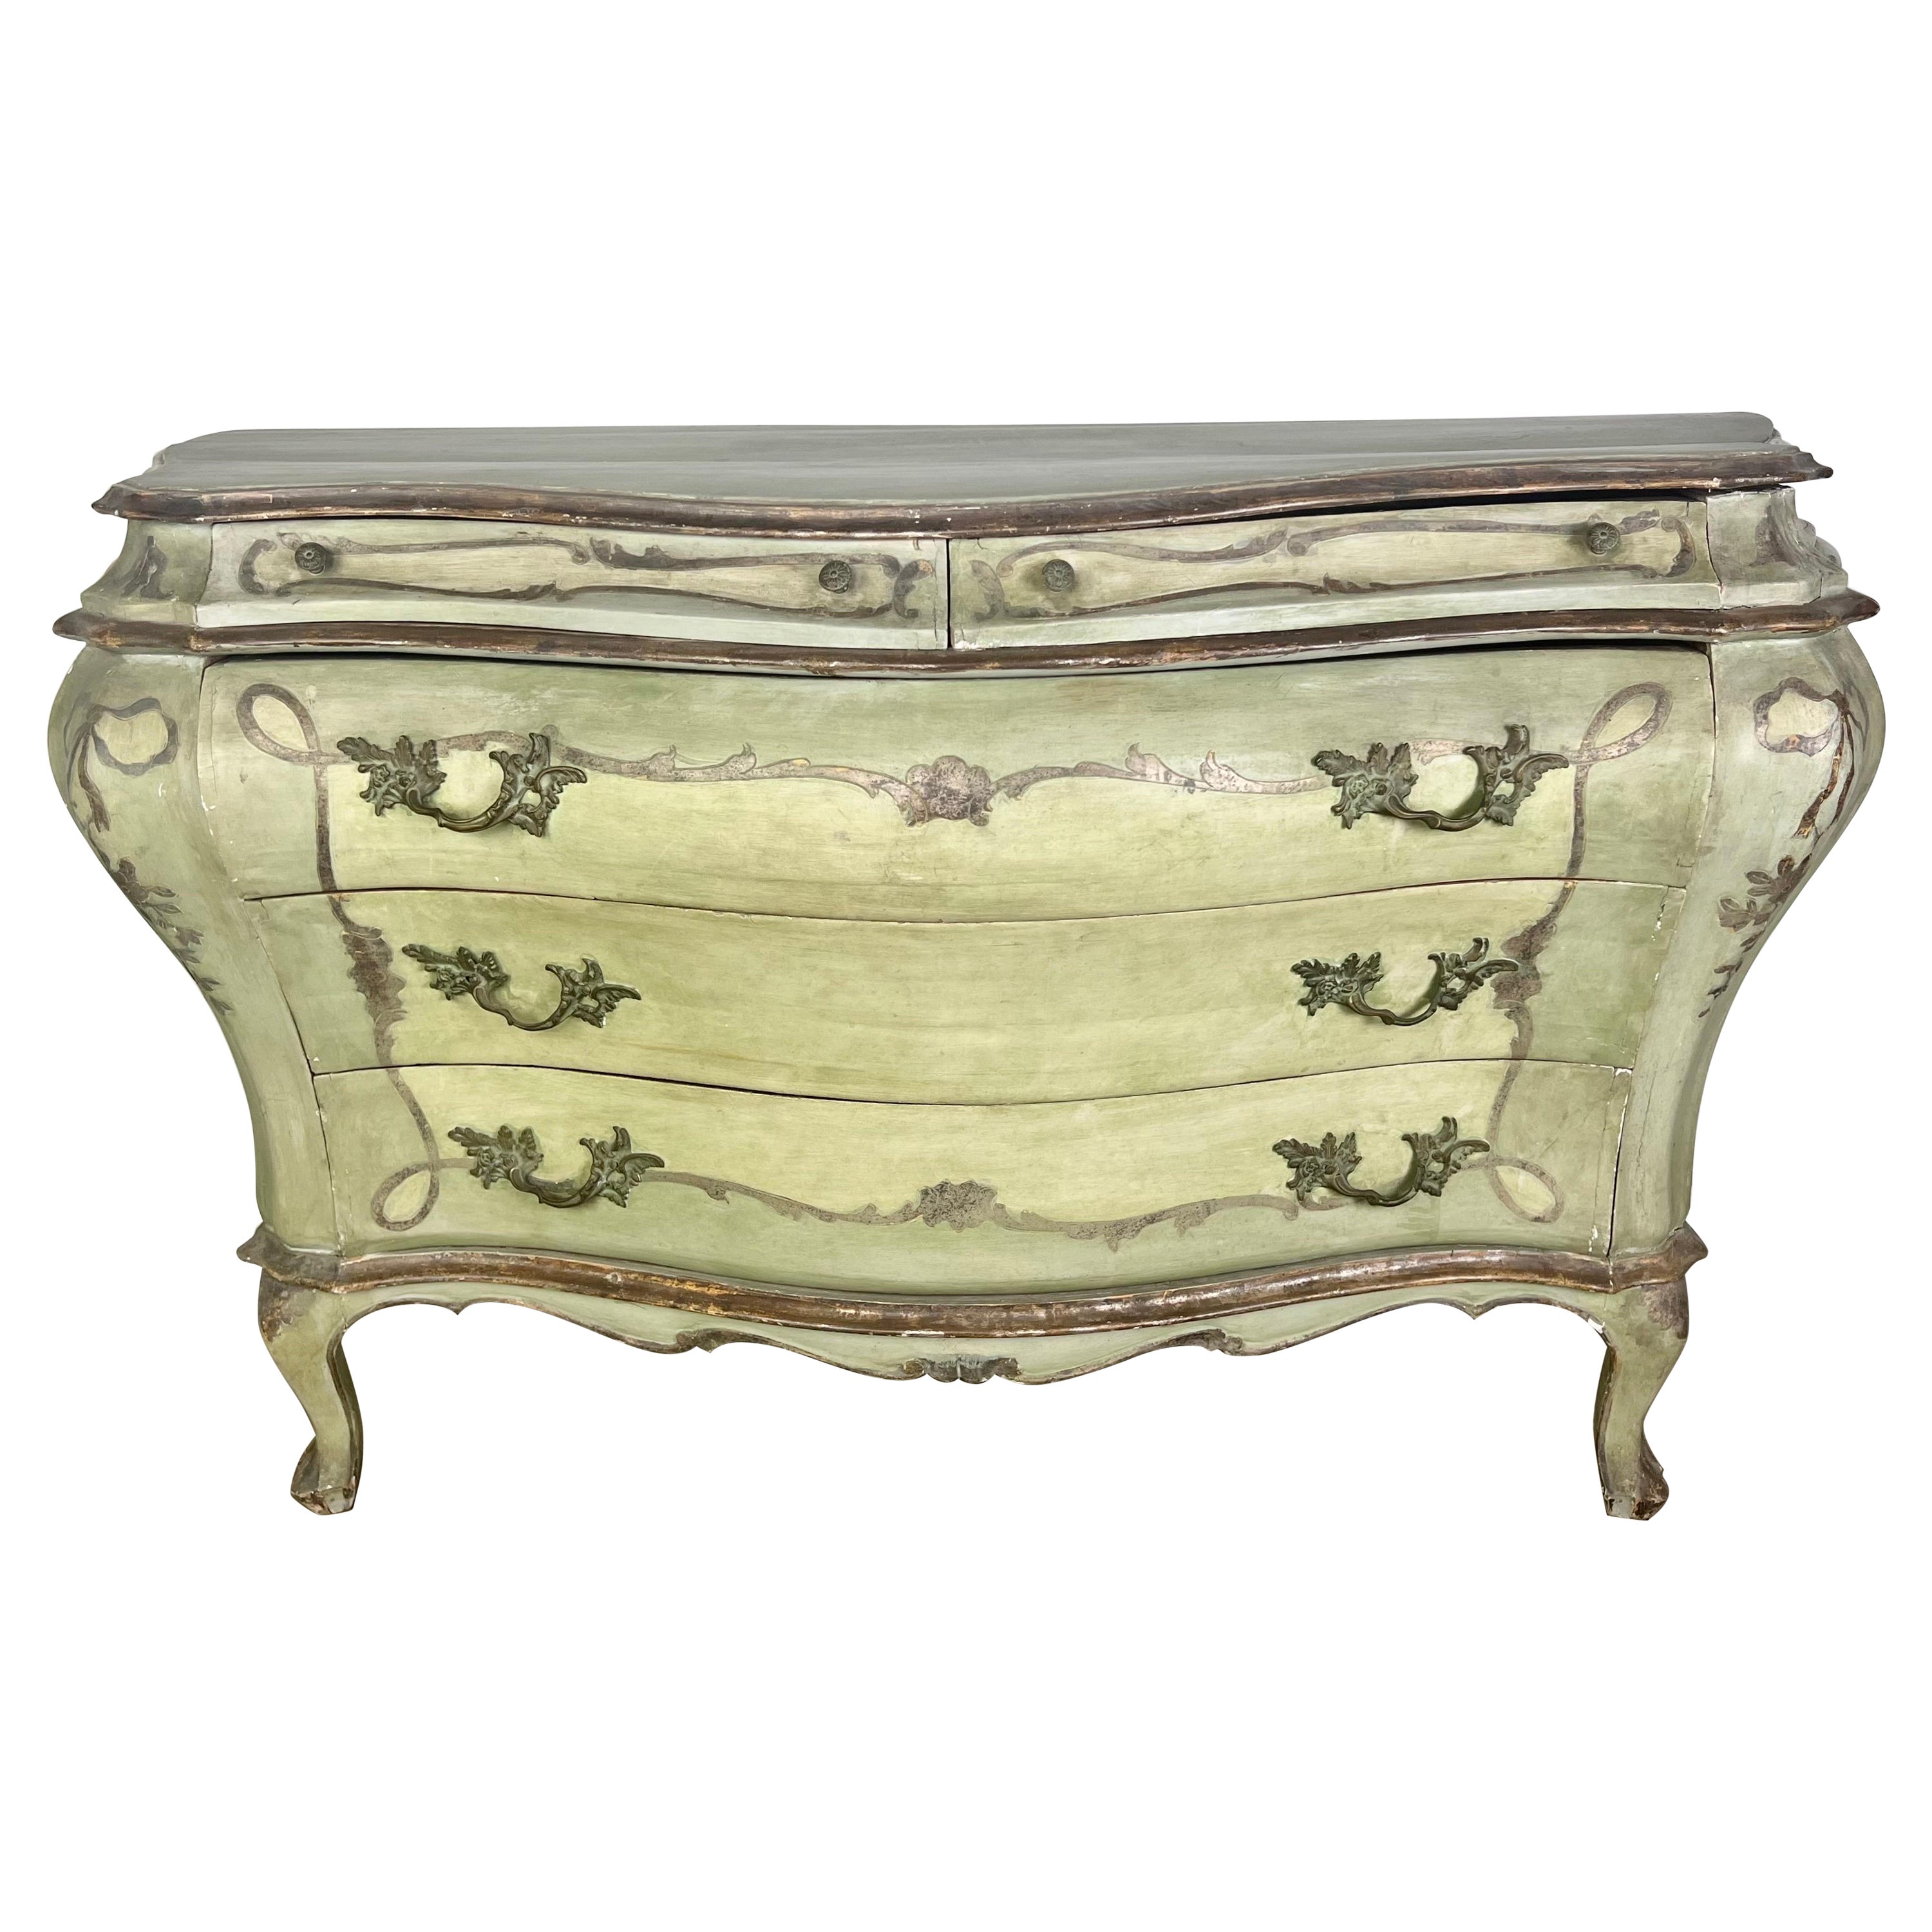 19th C. French Painted Bombay Chest